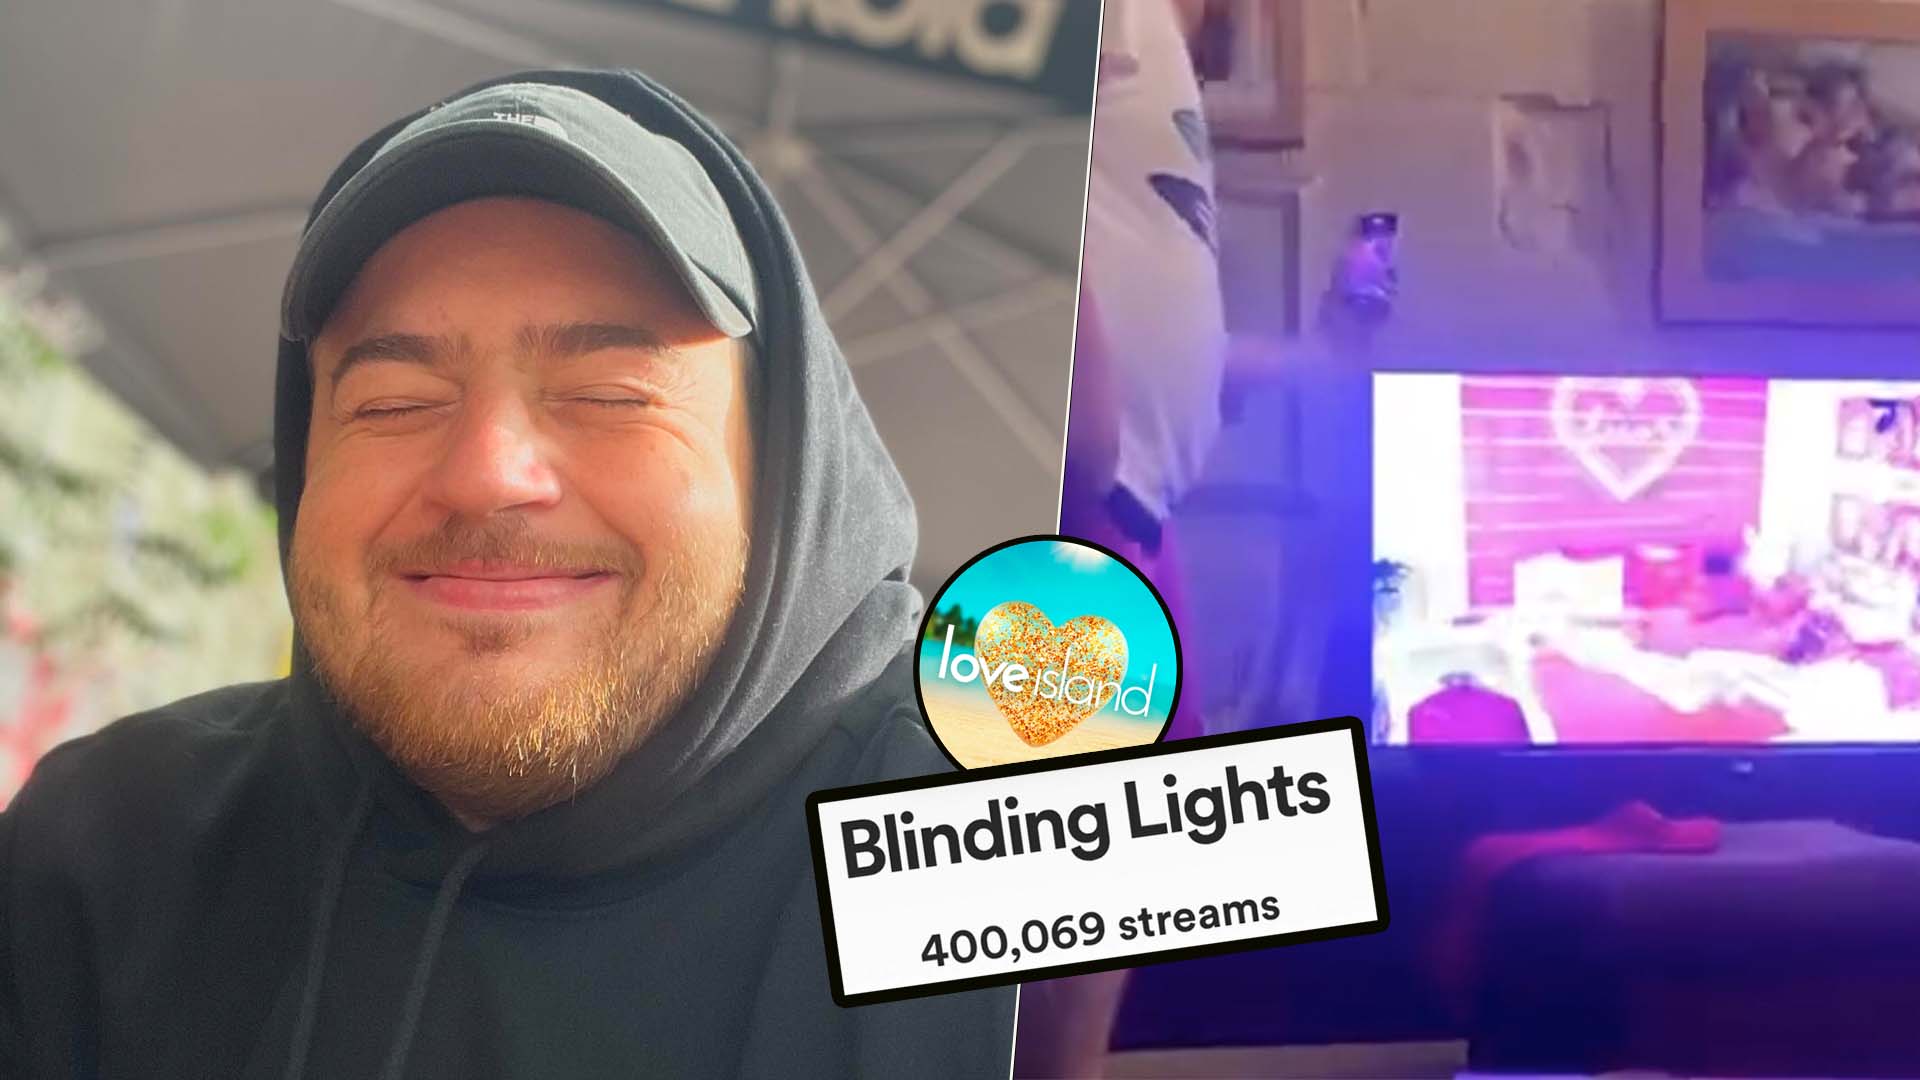 Over 400K Streams After Love Island Feature For Shaun Farrugia